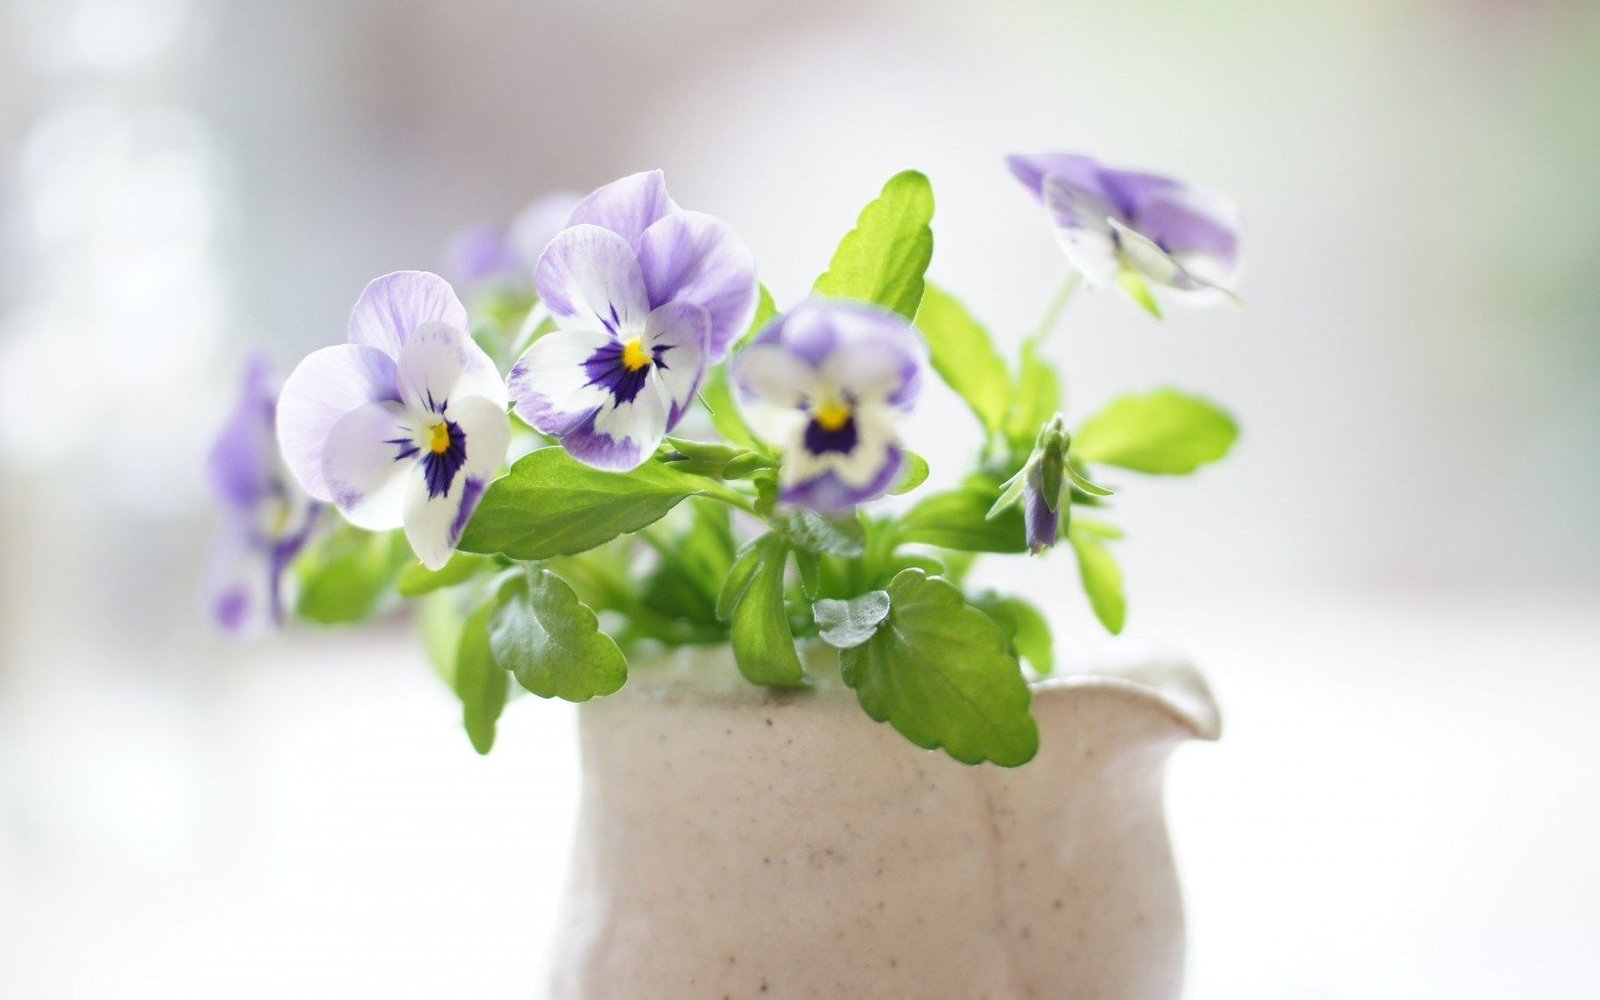 Pansies care tips and useful information